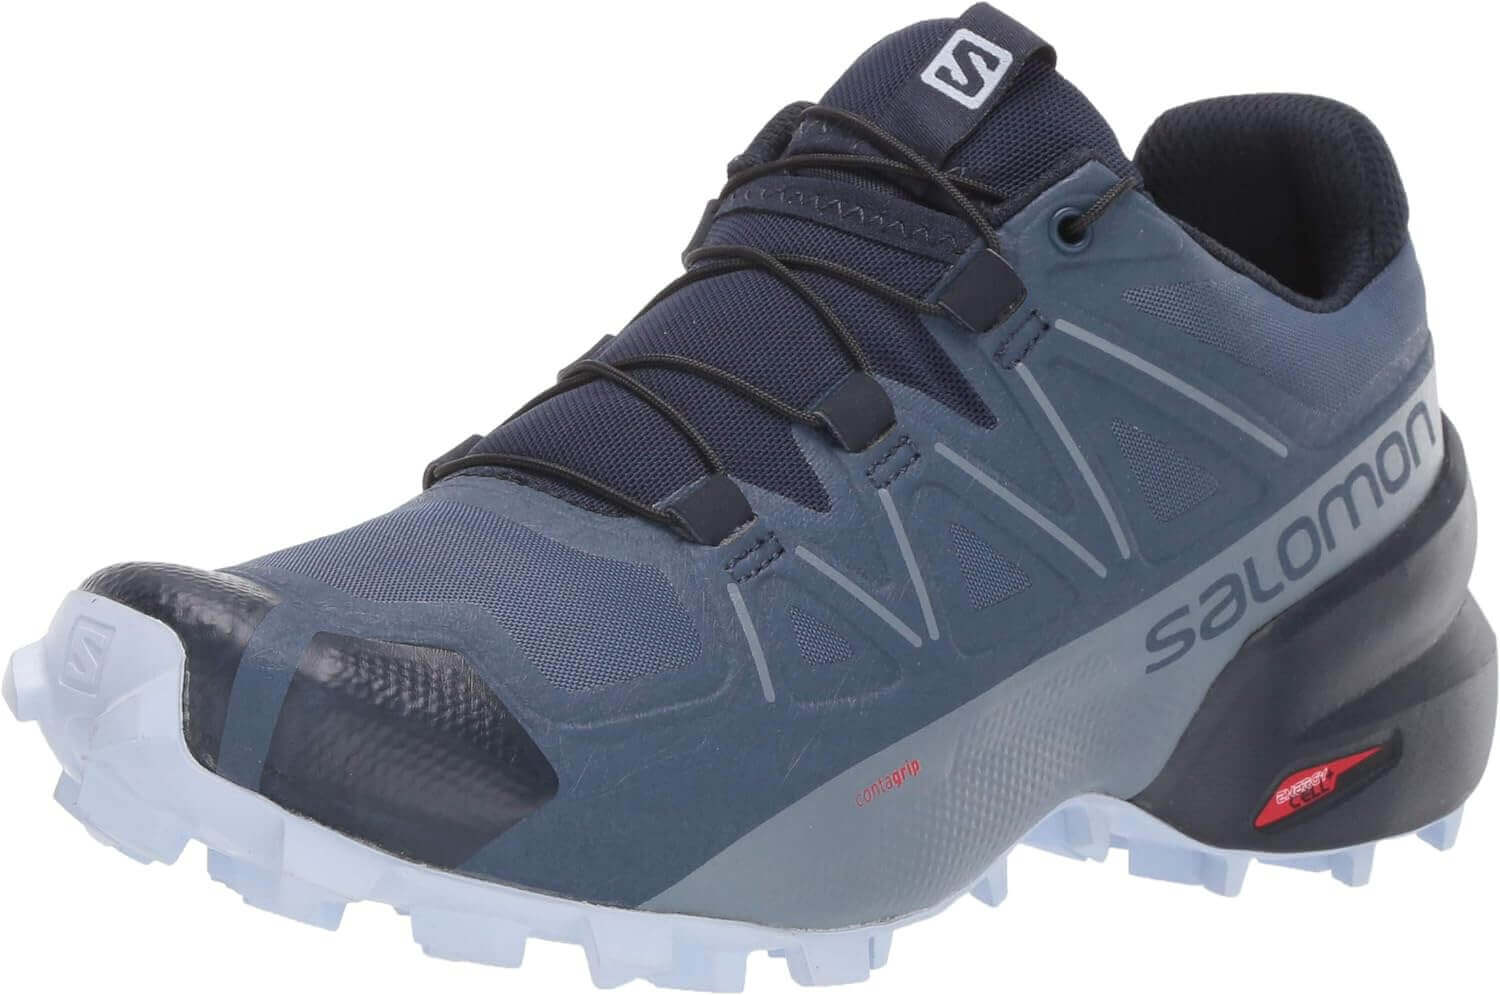 Shop The Latest >Salomon Women's Speedcross 5 Trail Running Shoes > *Only $264.56*> From The Top Brand > *Salomonl* > Shop Now and Get Free Shipping On Orders Over $45.00 >*Shop Earth Foot*